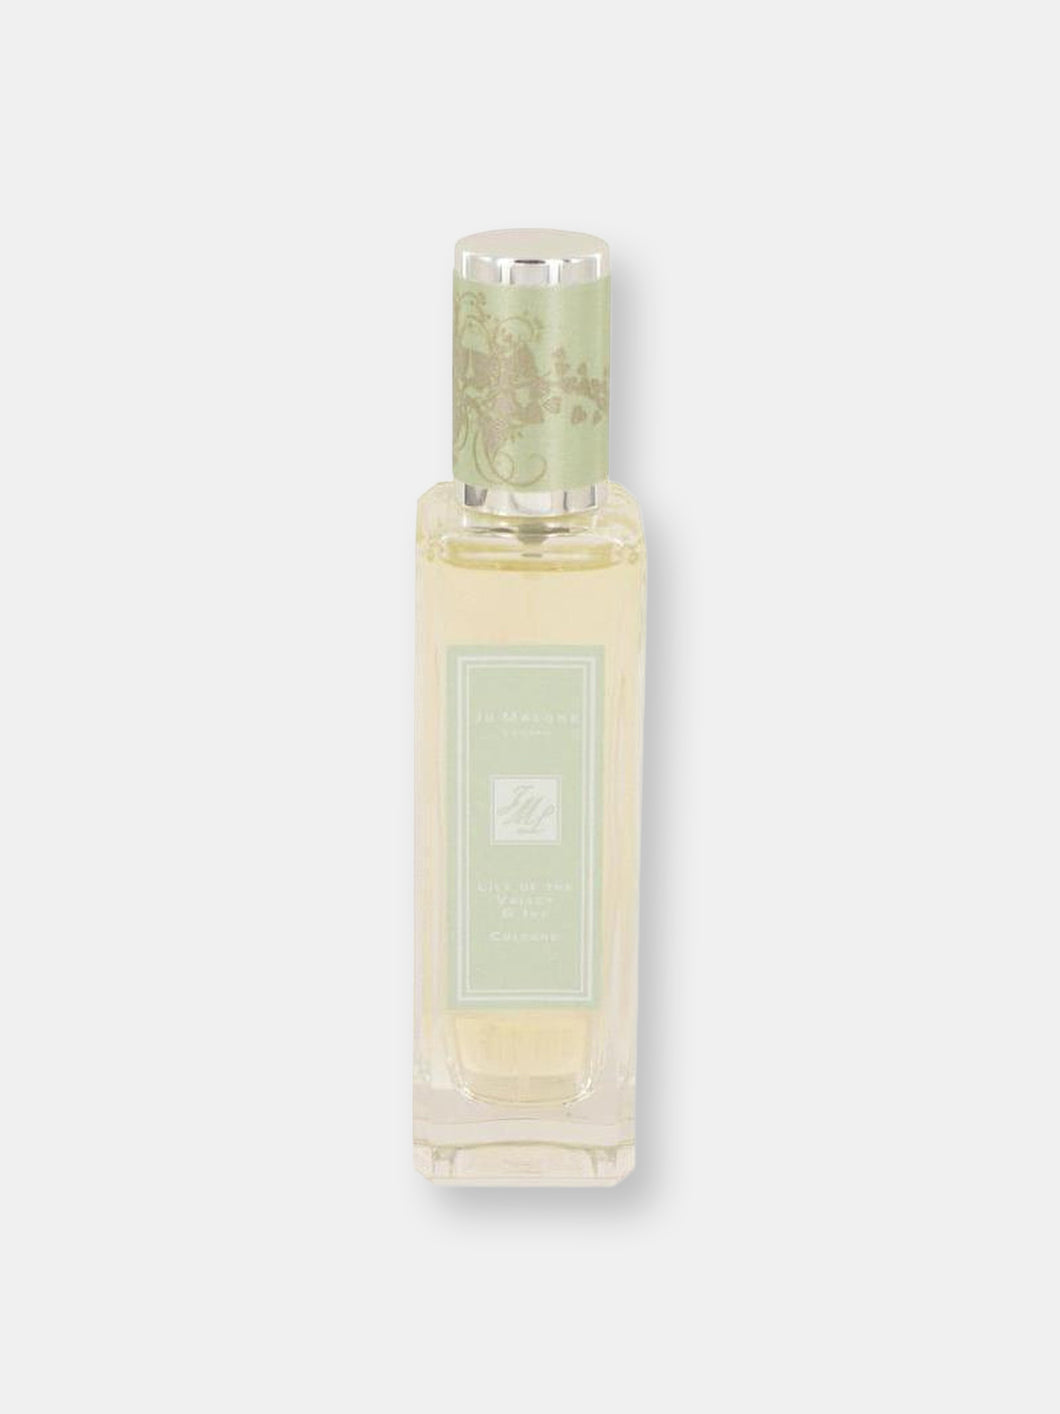 Jo Malone Lily of The Valley & Ivy by Jo Malone Cologne Spray (Unisex Unboxed) 1 oz